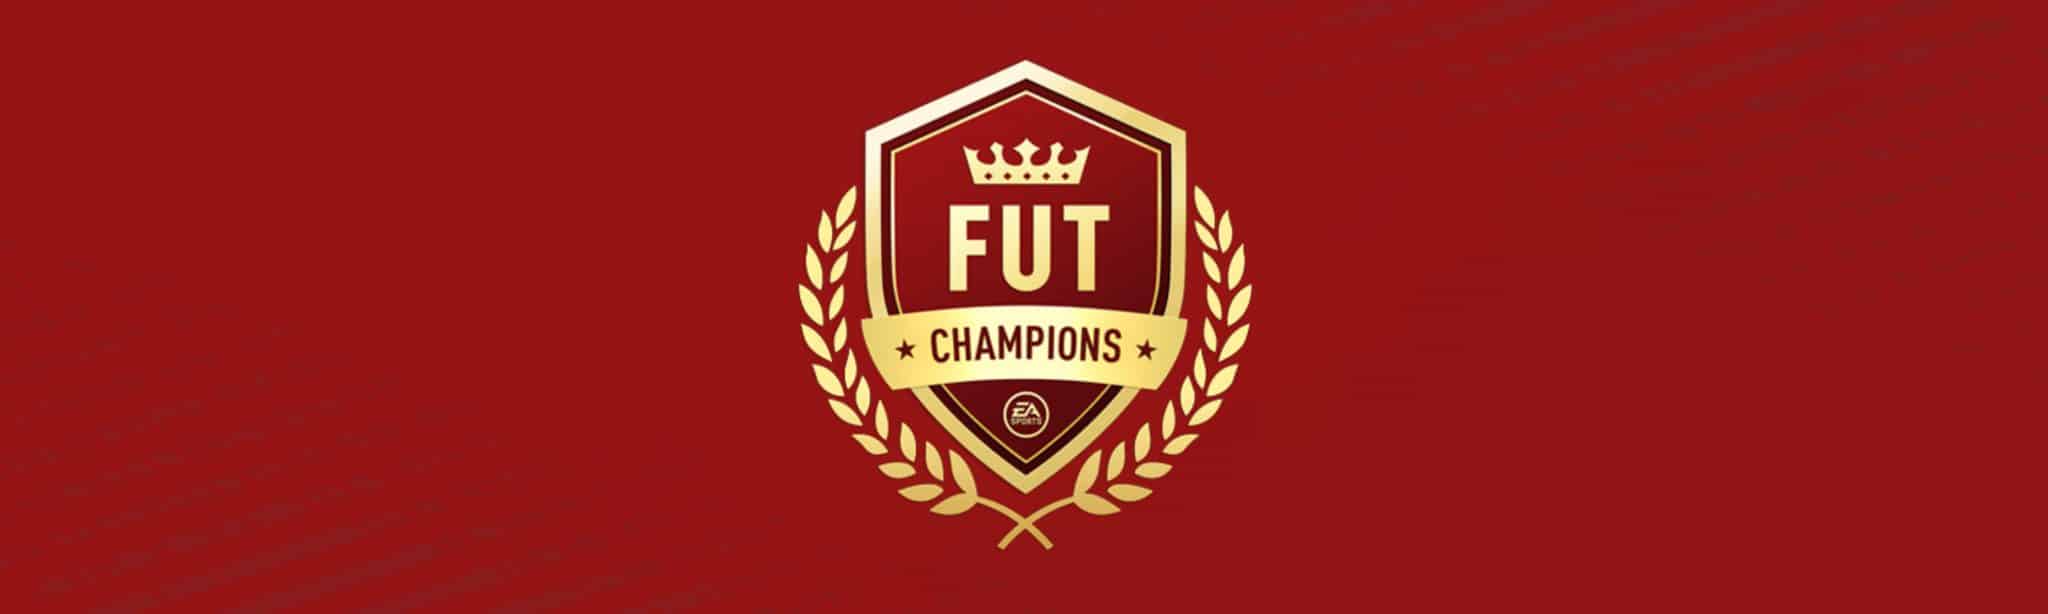 FIFA 22 Ultimate Team changes: FUT Champions, Division Rivals and other new  features